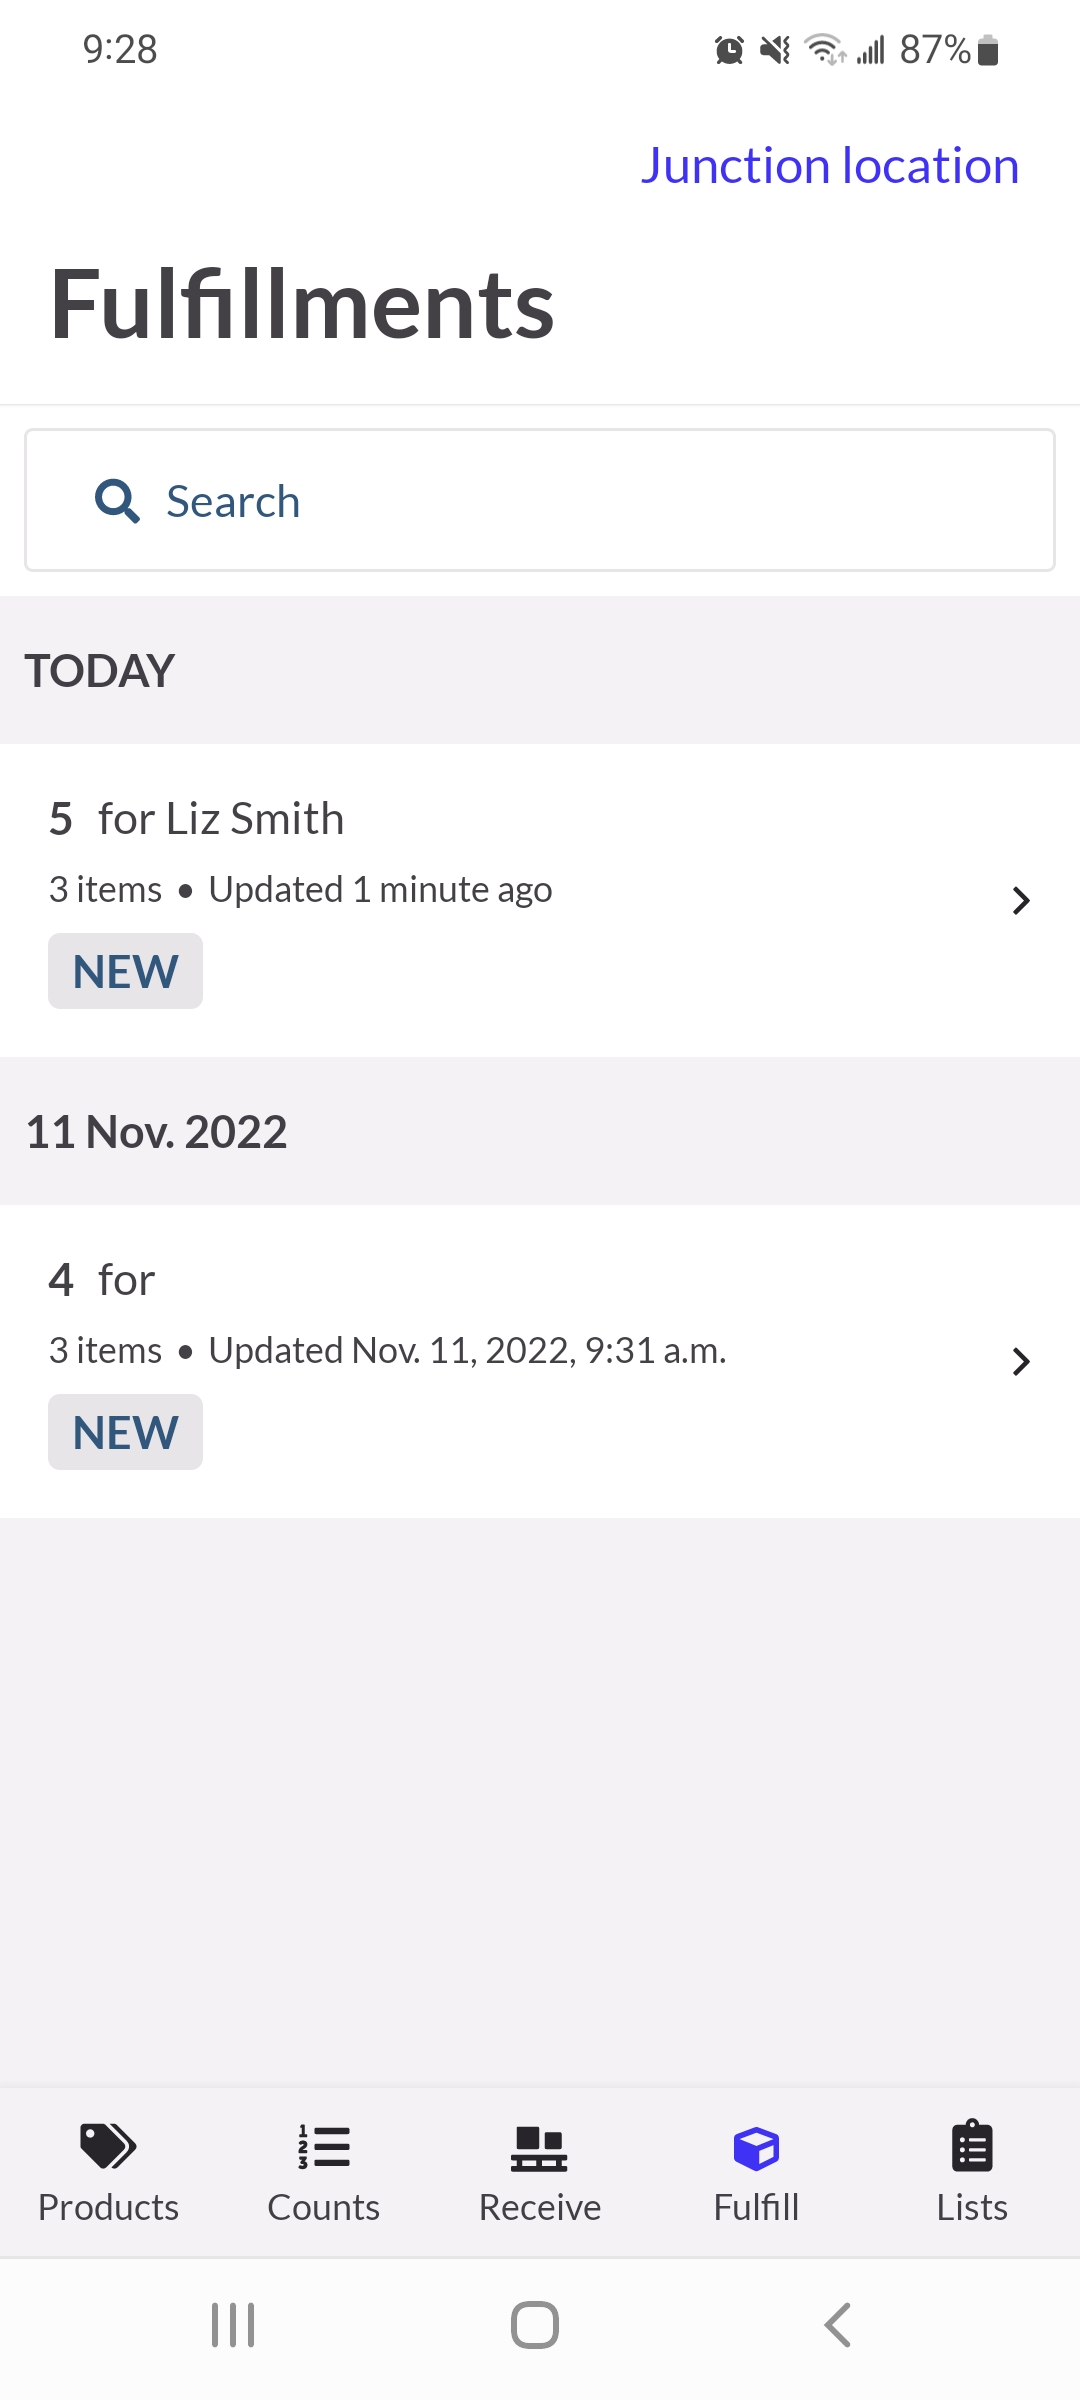 Scanner app fulfillments page with orders to be picked.